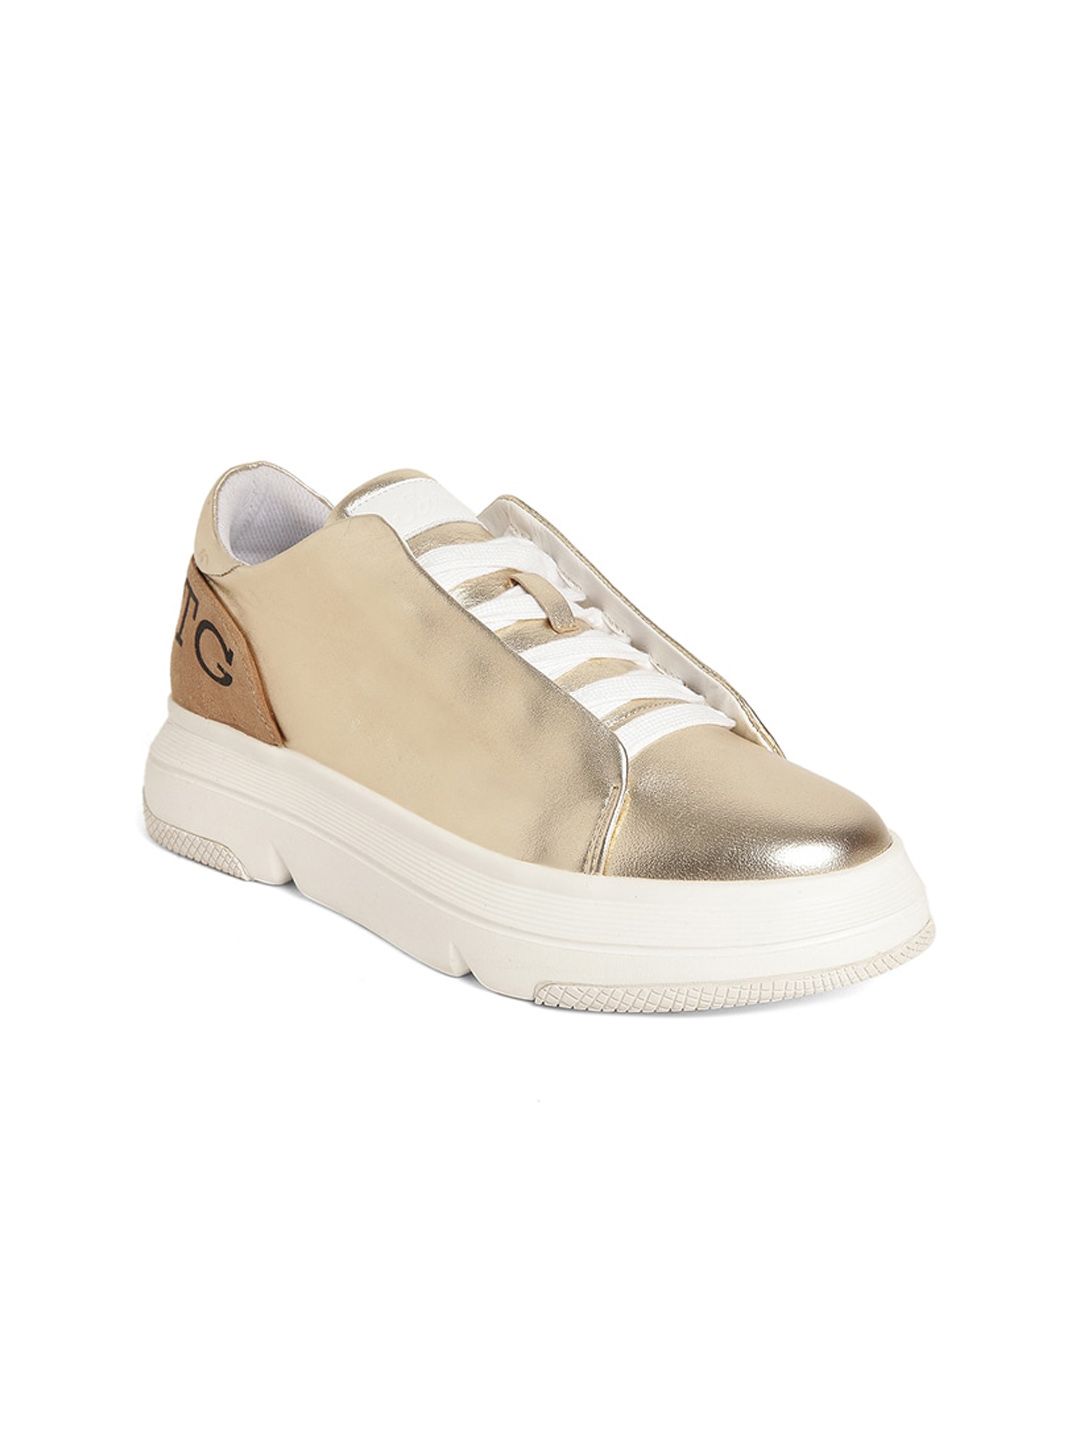 Saint G Women Gold-Toned Colourblocked Lightweight Leather Sneakers Price in India